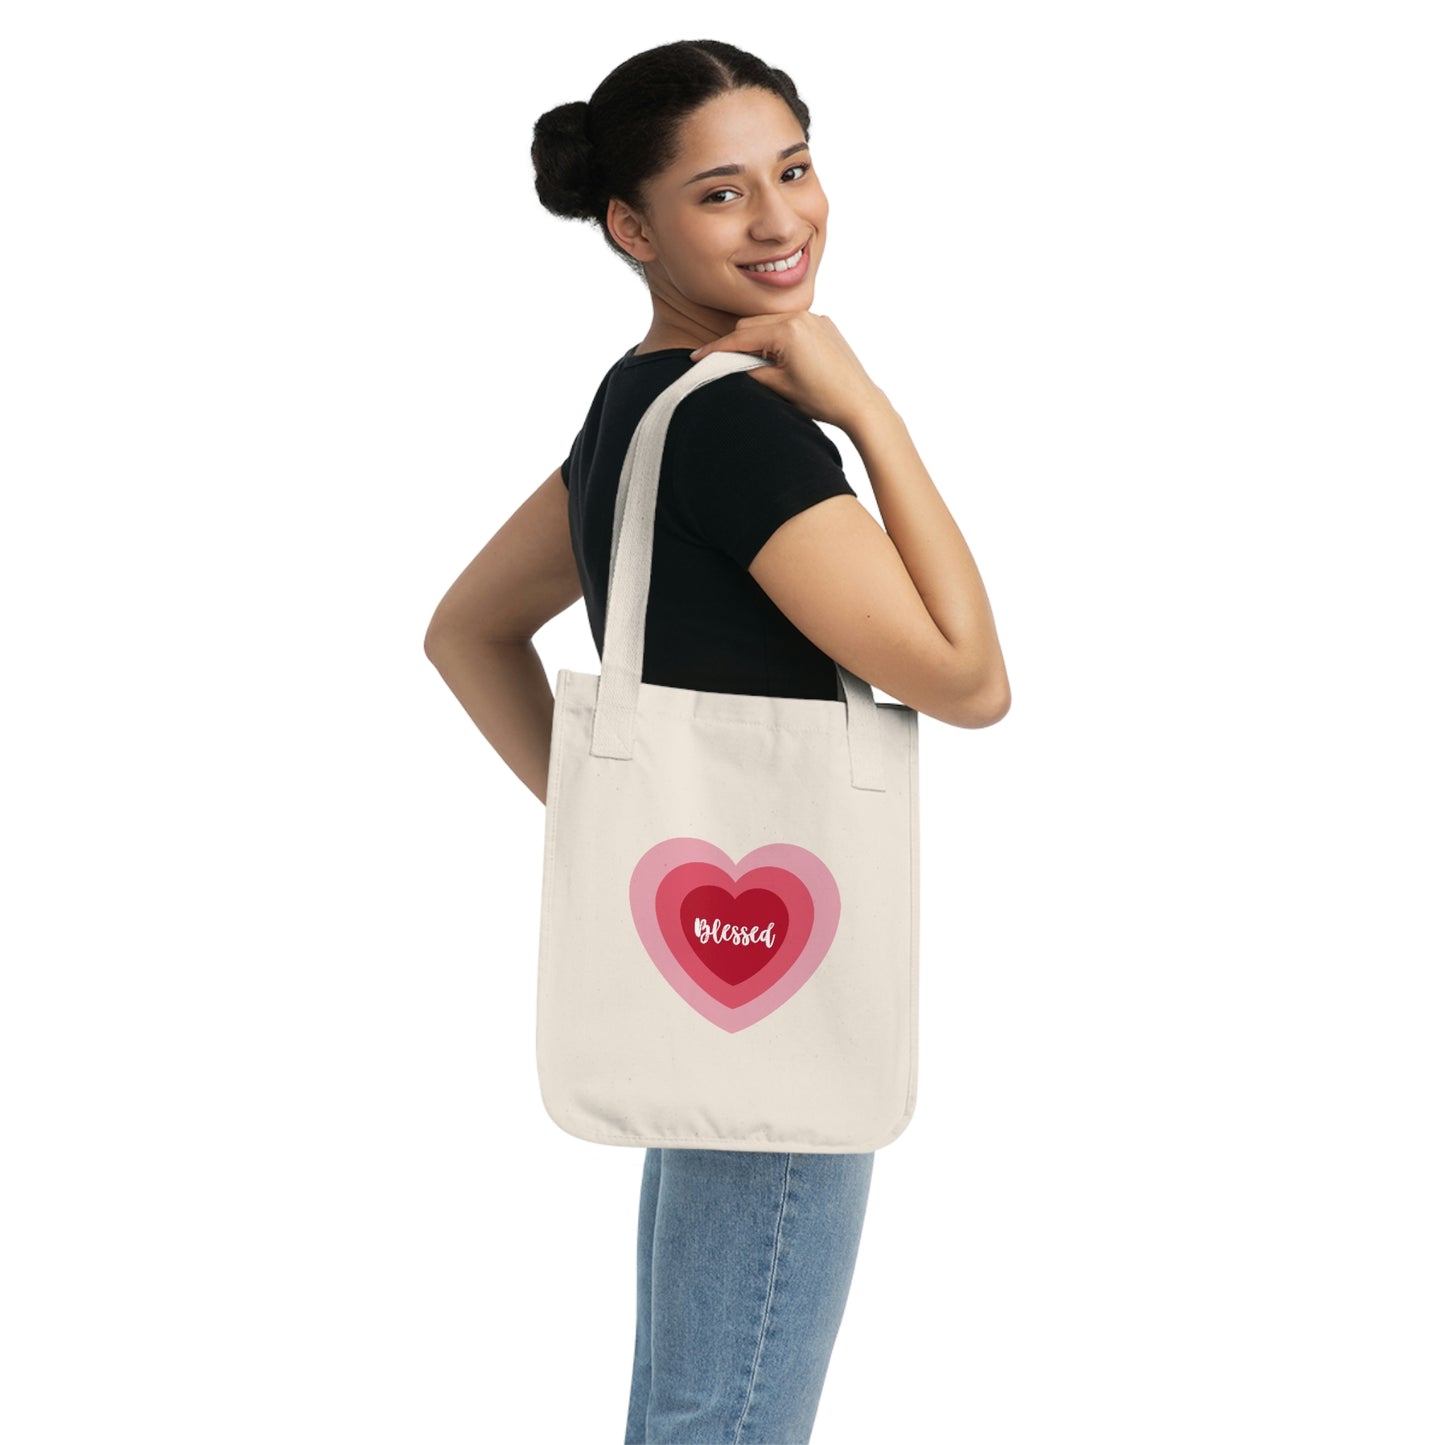 Blessed Heart - Organic Canvas Tote Bag